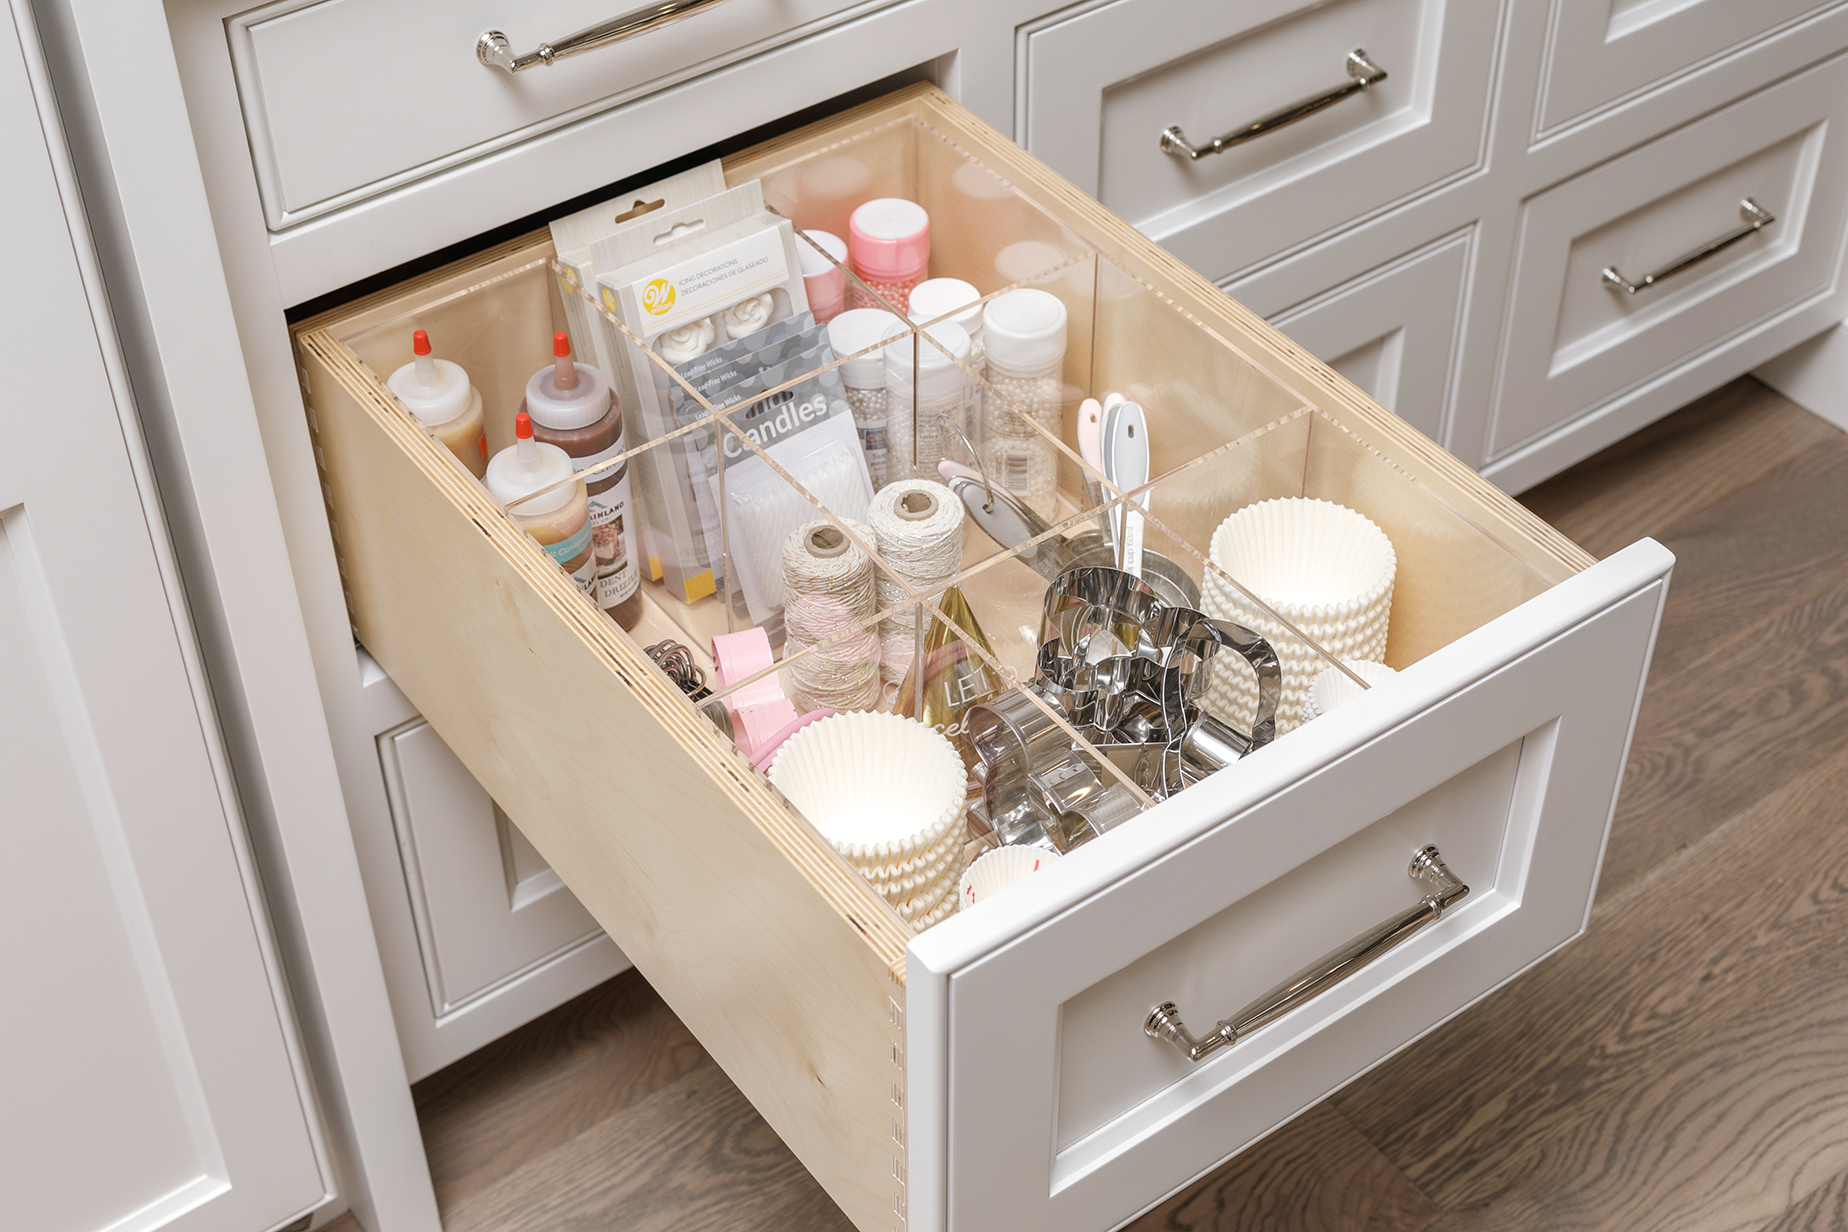 Tackle Kitchen Clutter With These Drawer Organizers